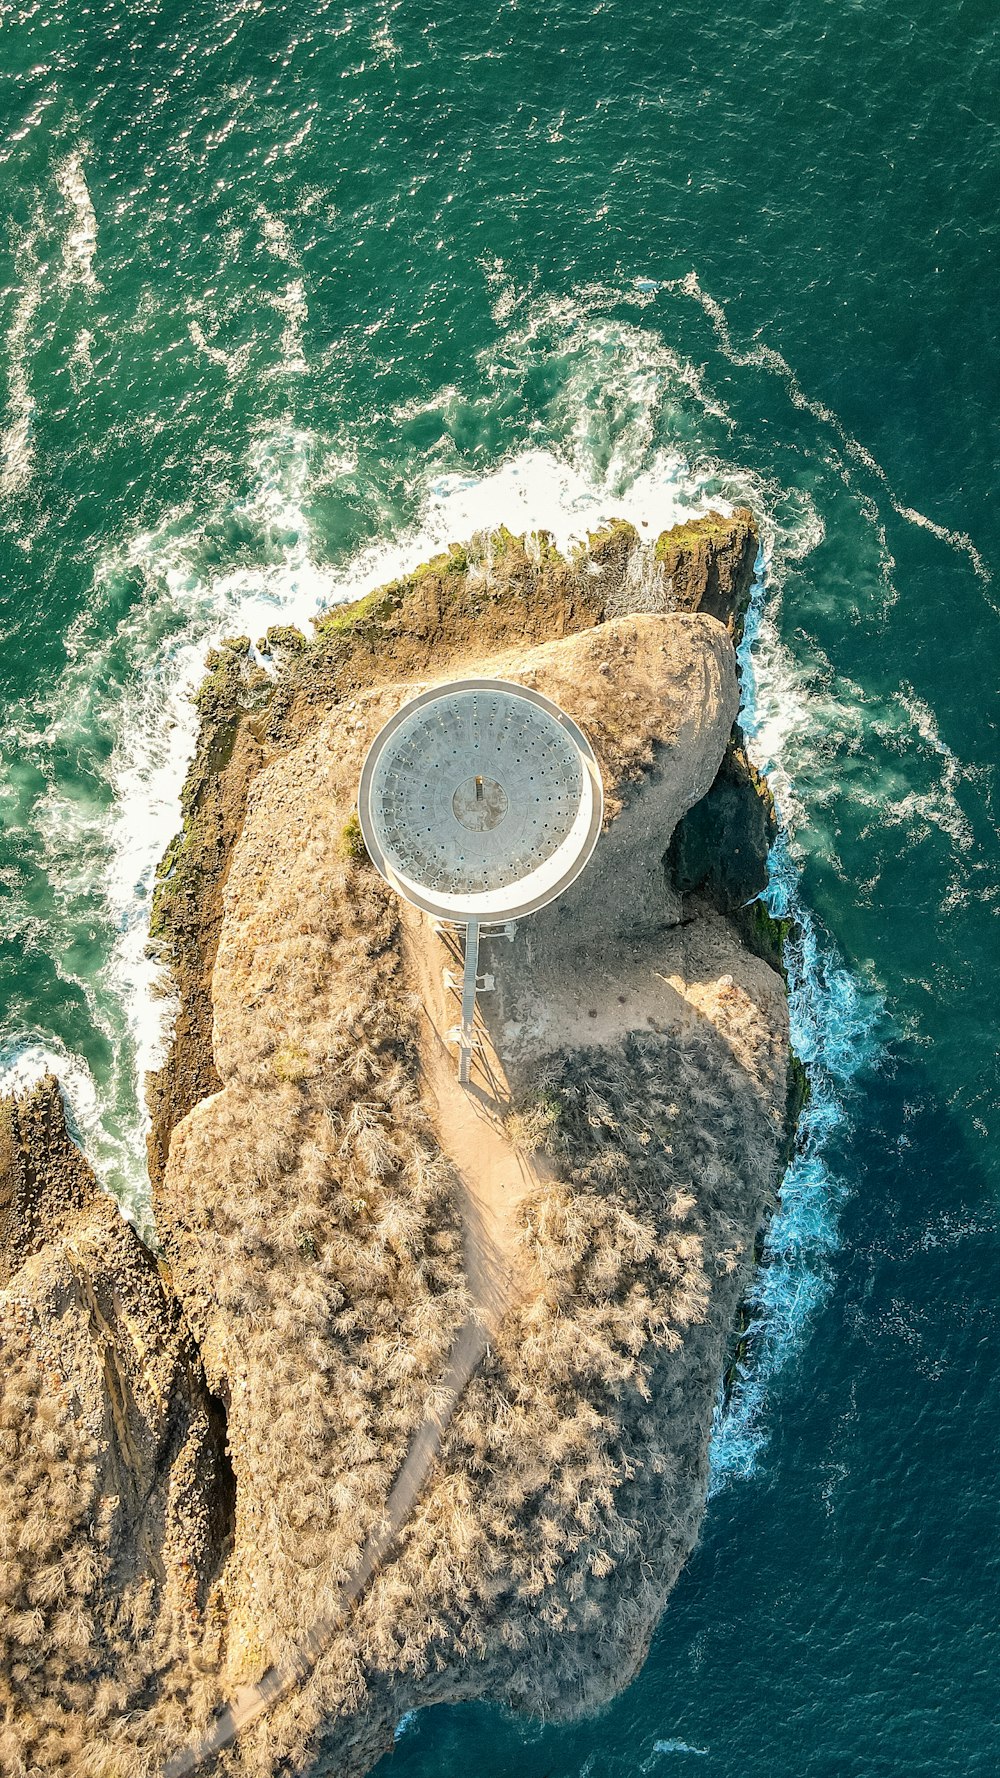 a satellite dish sitting on top of a rock in the ocean